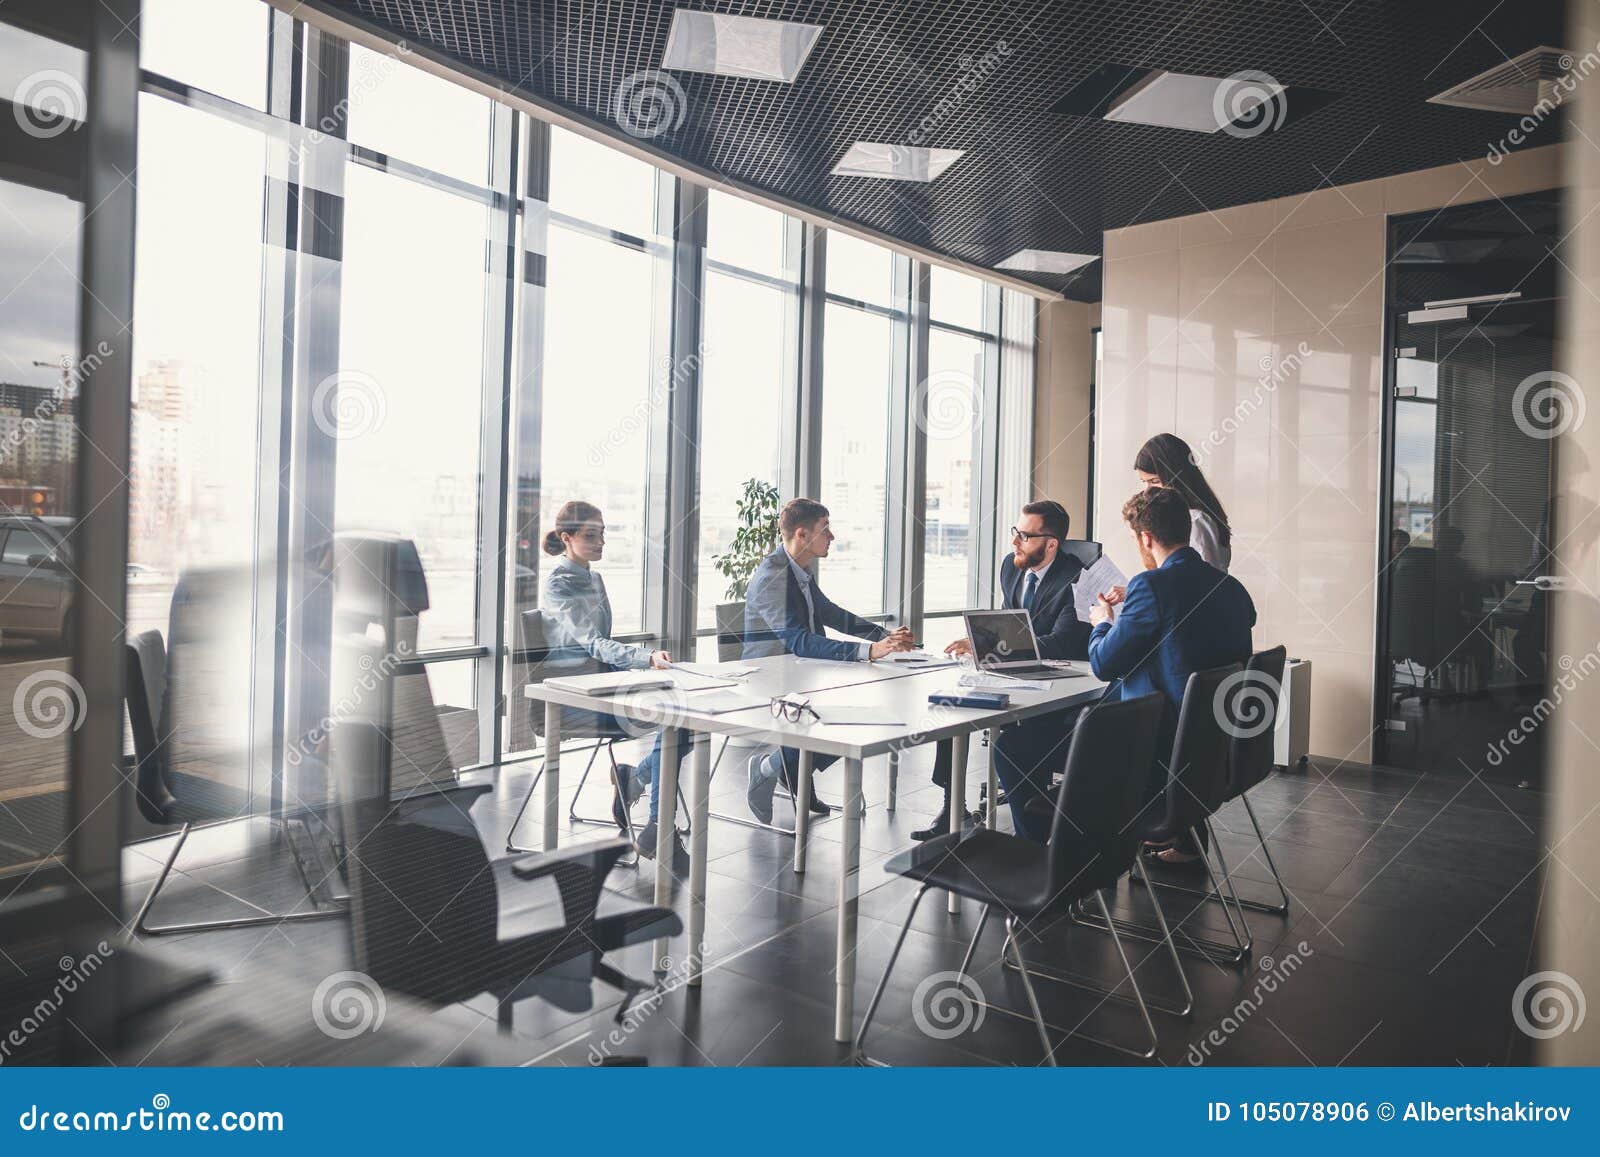 business team and manager in a meeting